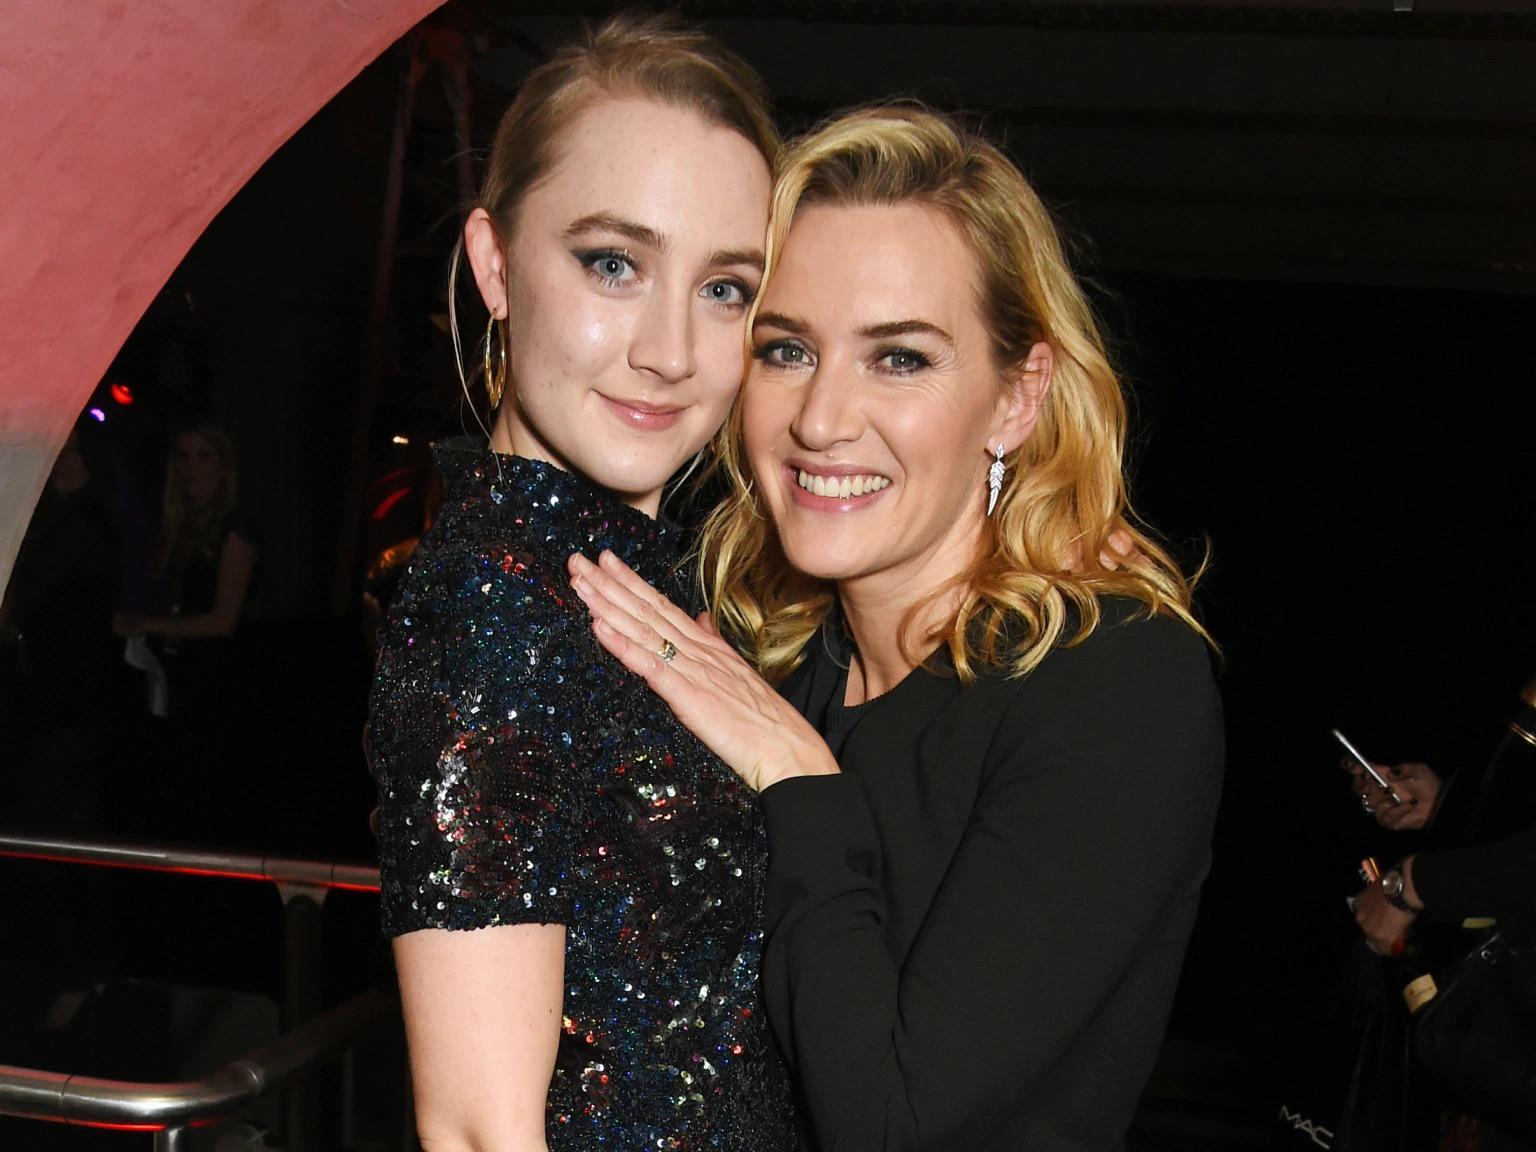 Saoirse Ronan And Kate Winslet You Have A Threesome With Them But You Only Get To Creampie One